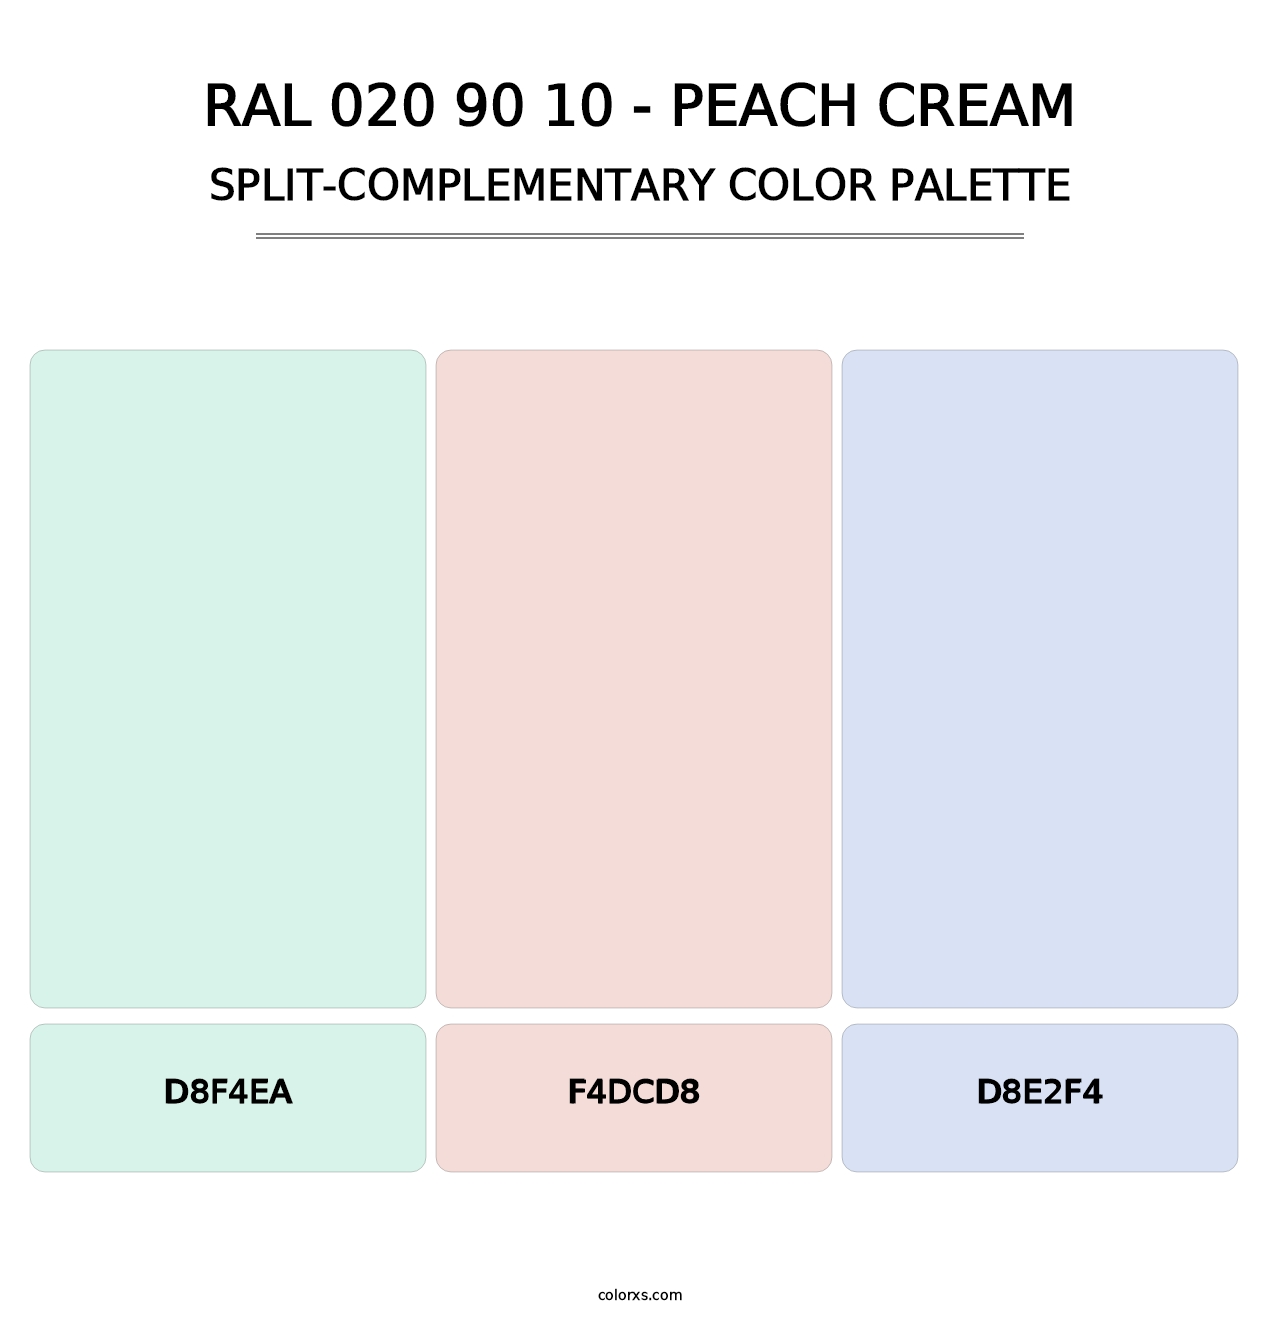 RAL 020 90 10 - Peach Cream - Split-Complementary Color Palette